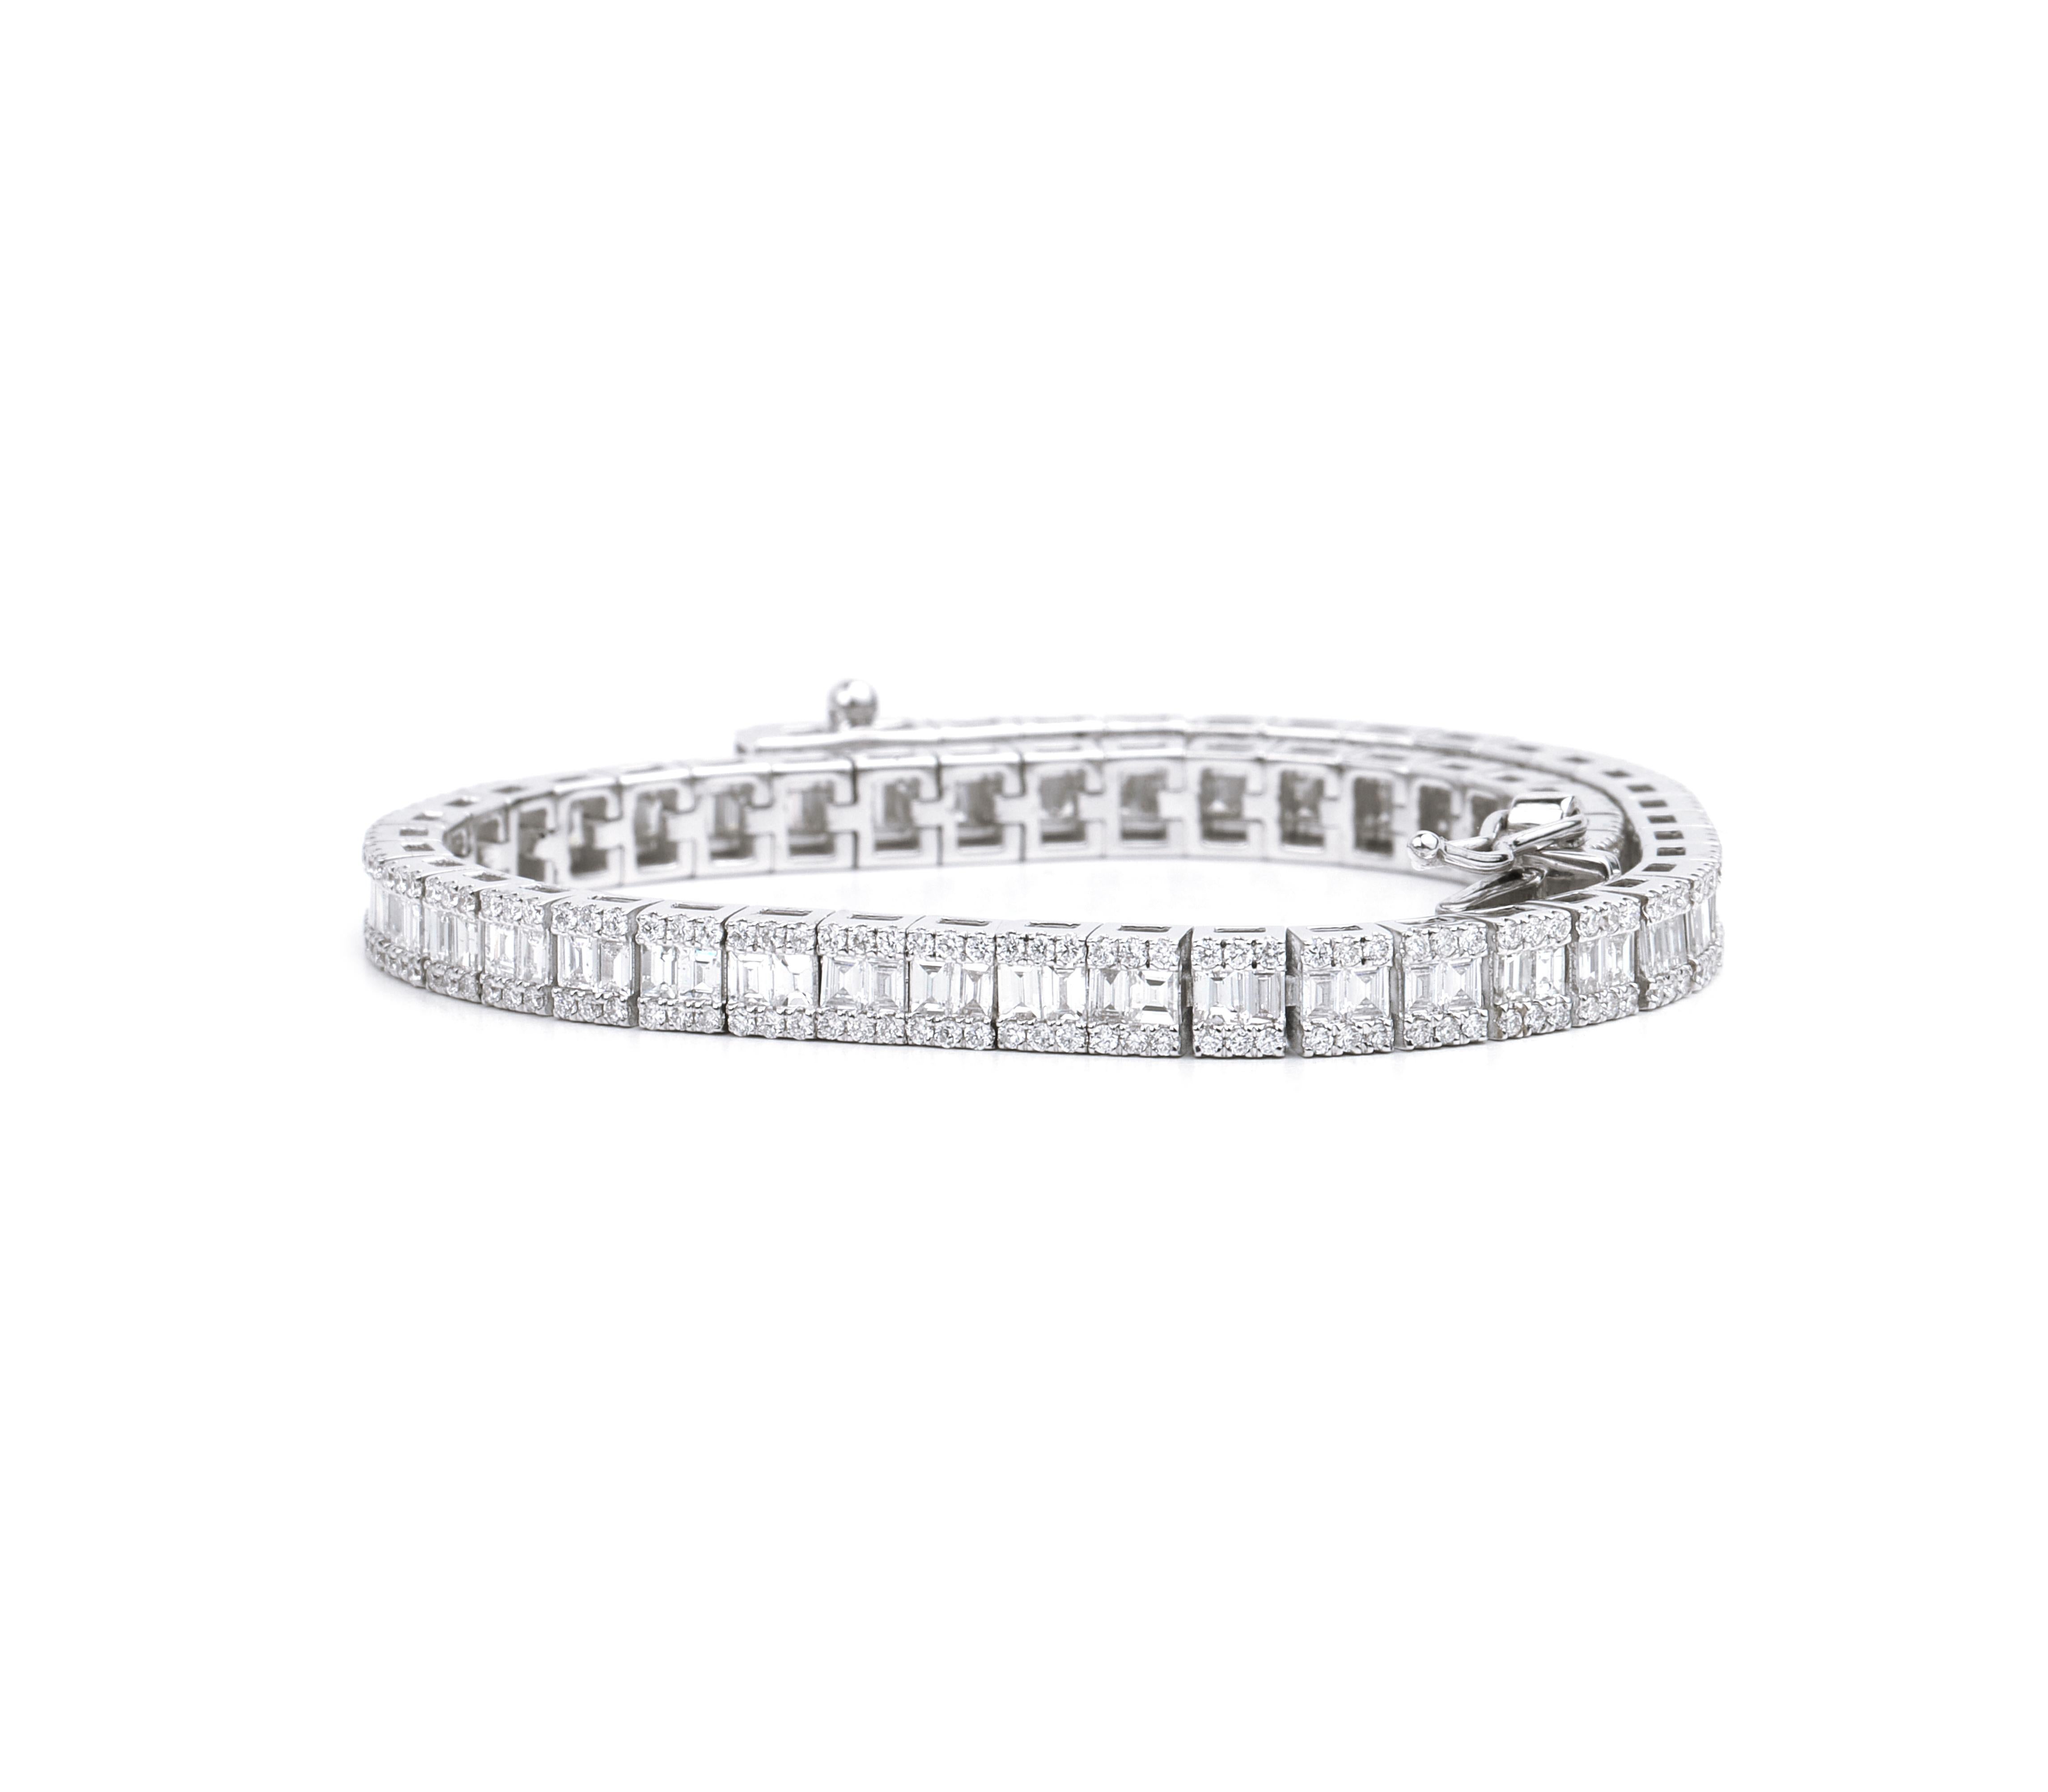 4.5Tcw Baguette Cut Natural Diamond Tennis Bracelet in 18k White Gold In New Condition For Sale In Jaipur, RJ